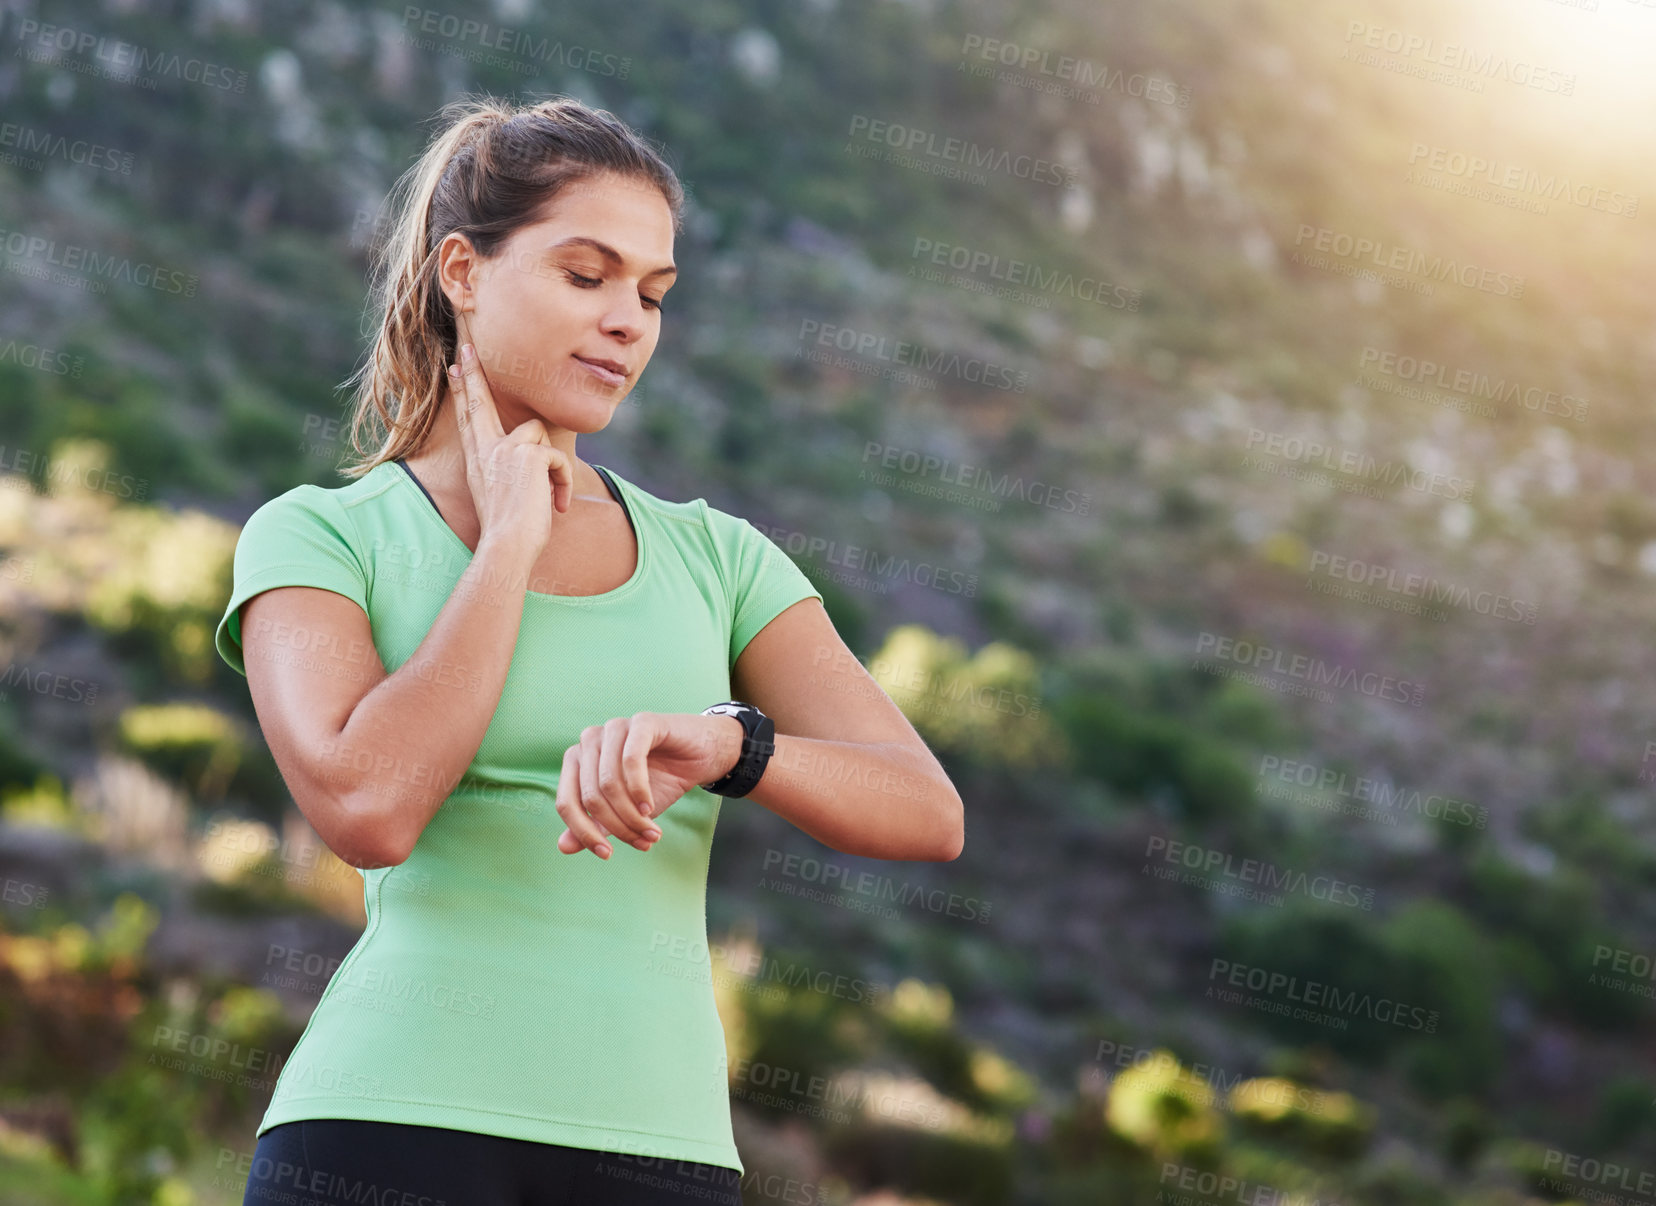 Buy stock photo Shot of a young woman checking her heart rate while exercising outdoors